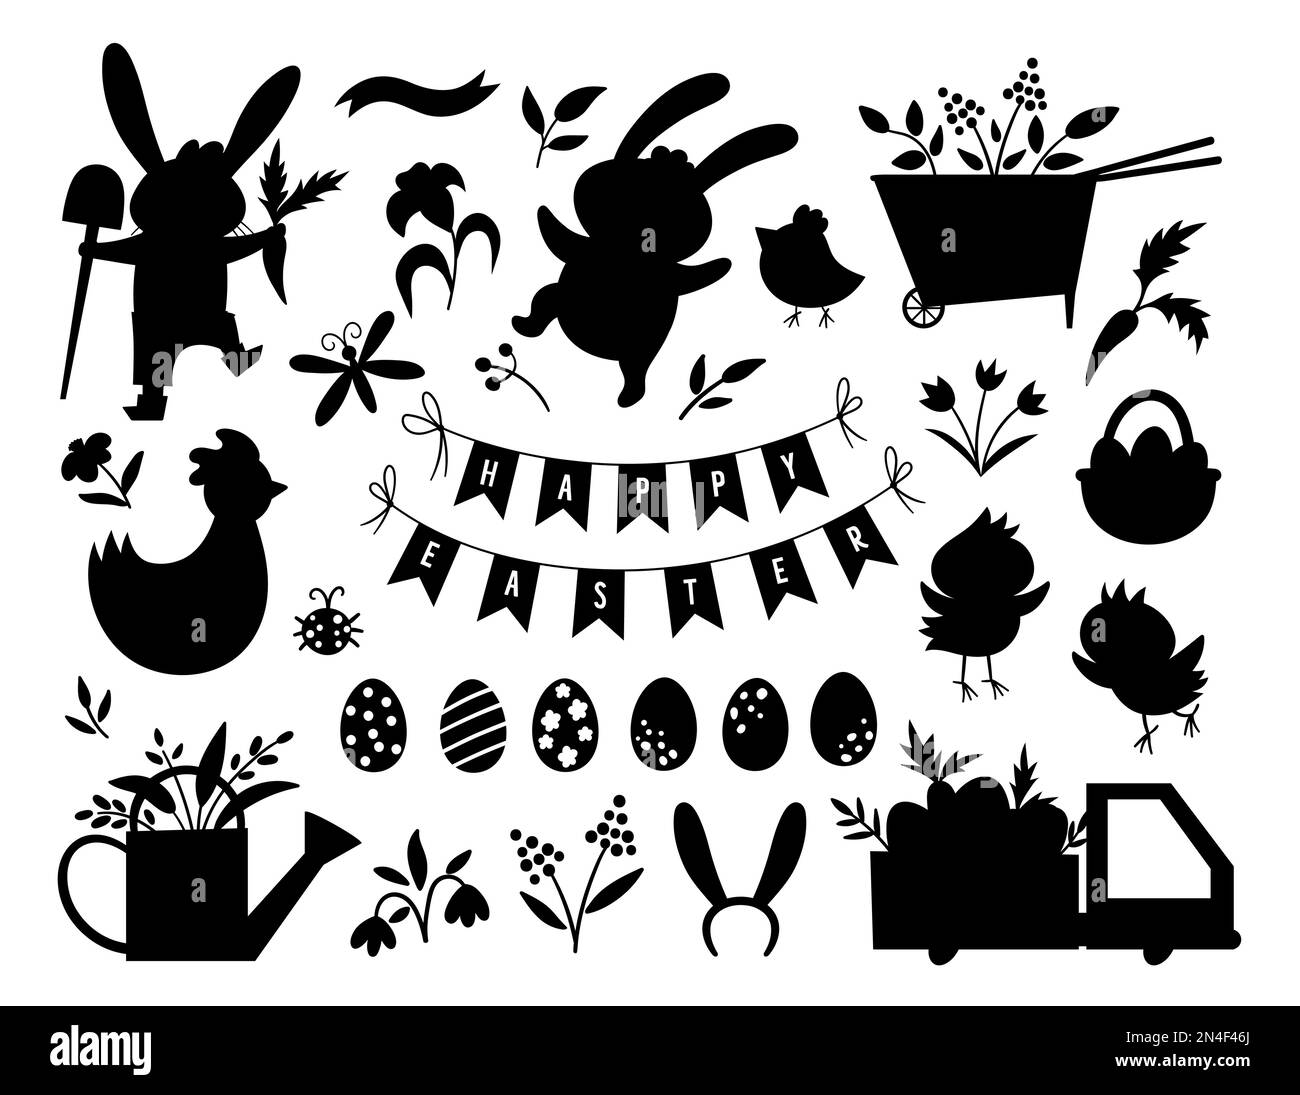 Vector Easter silhouettes set. Vector pack with cute bunny, eggs, bird, chicks, basket black shadows. Spring funny illustration. Adorable holiday icon Stock Vector